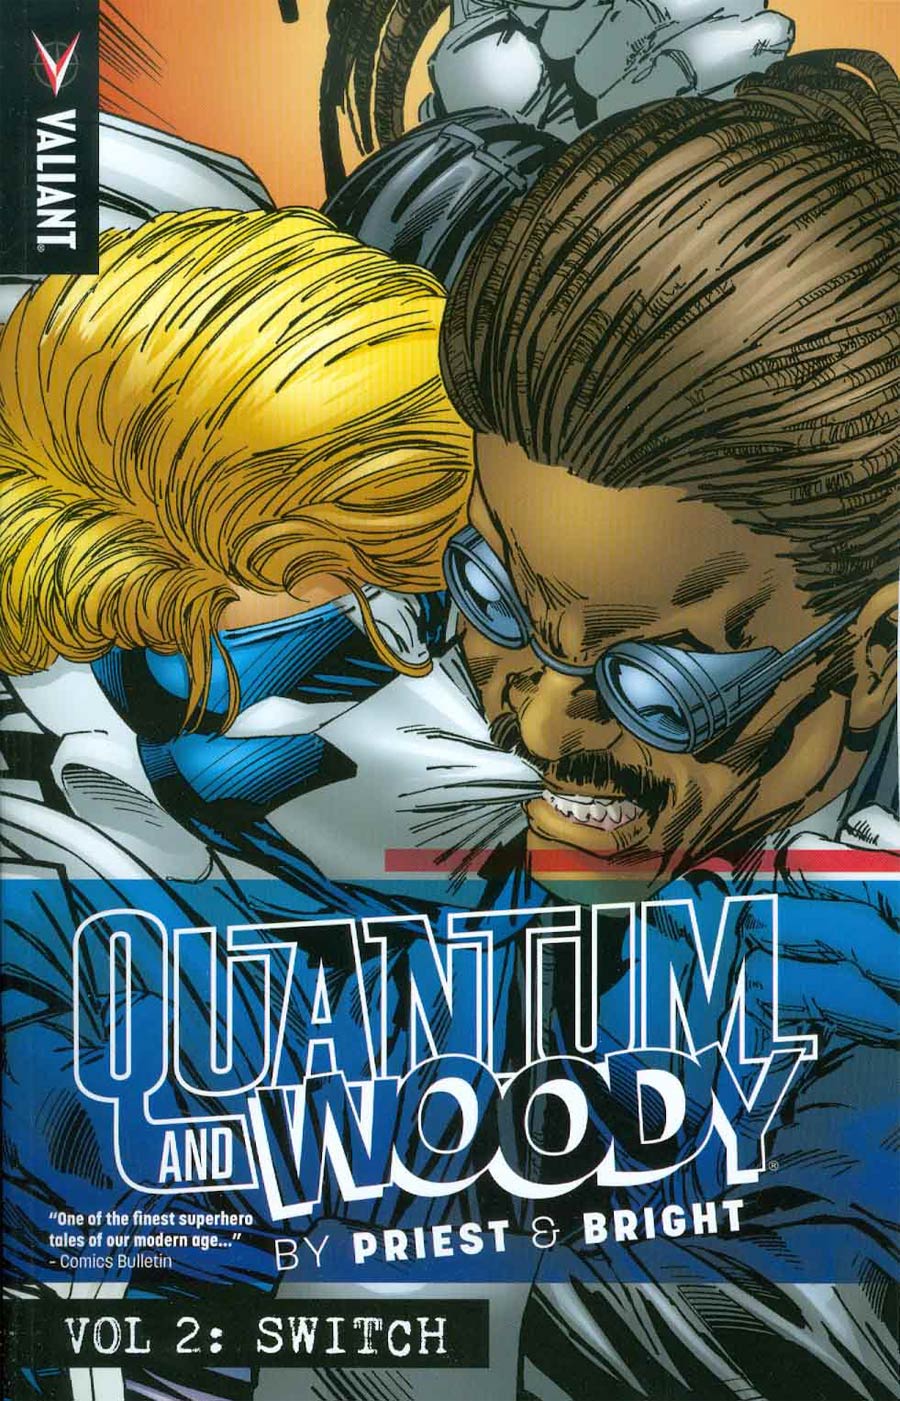 Quantum & Woody By Priest & Bright Vol 2 Switch TP